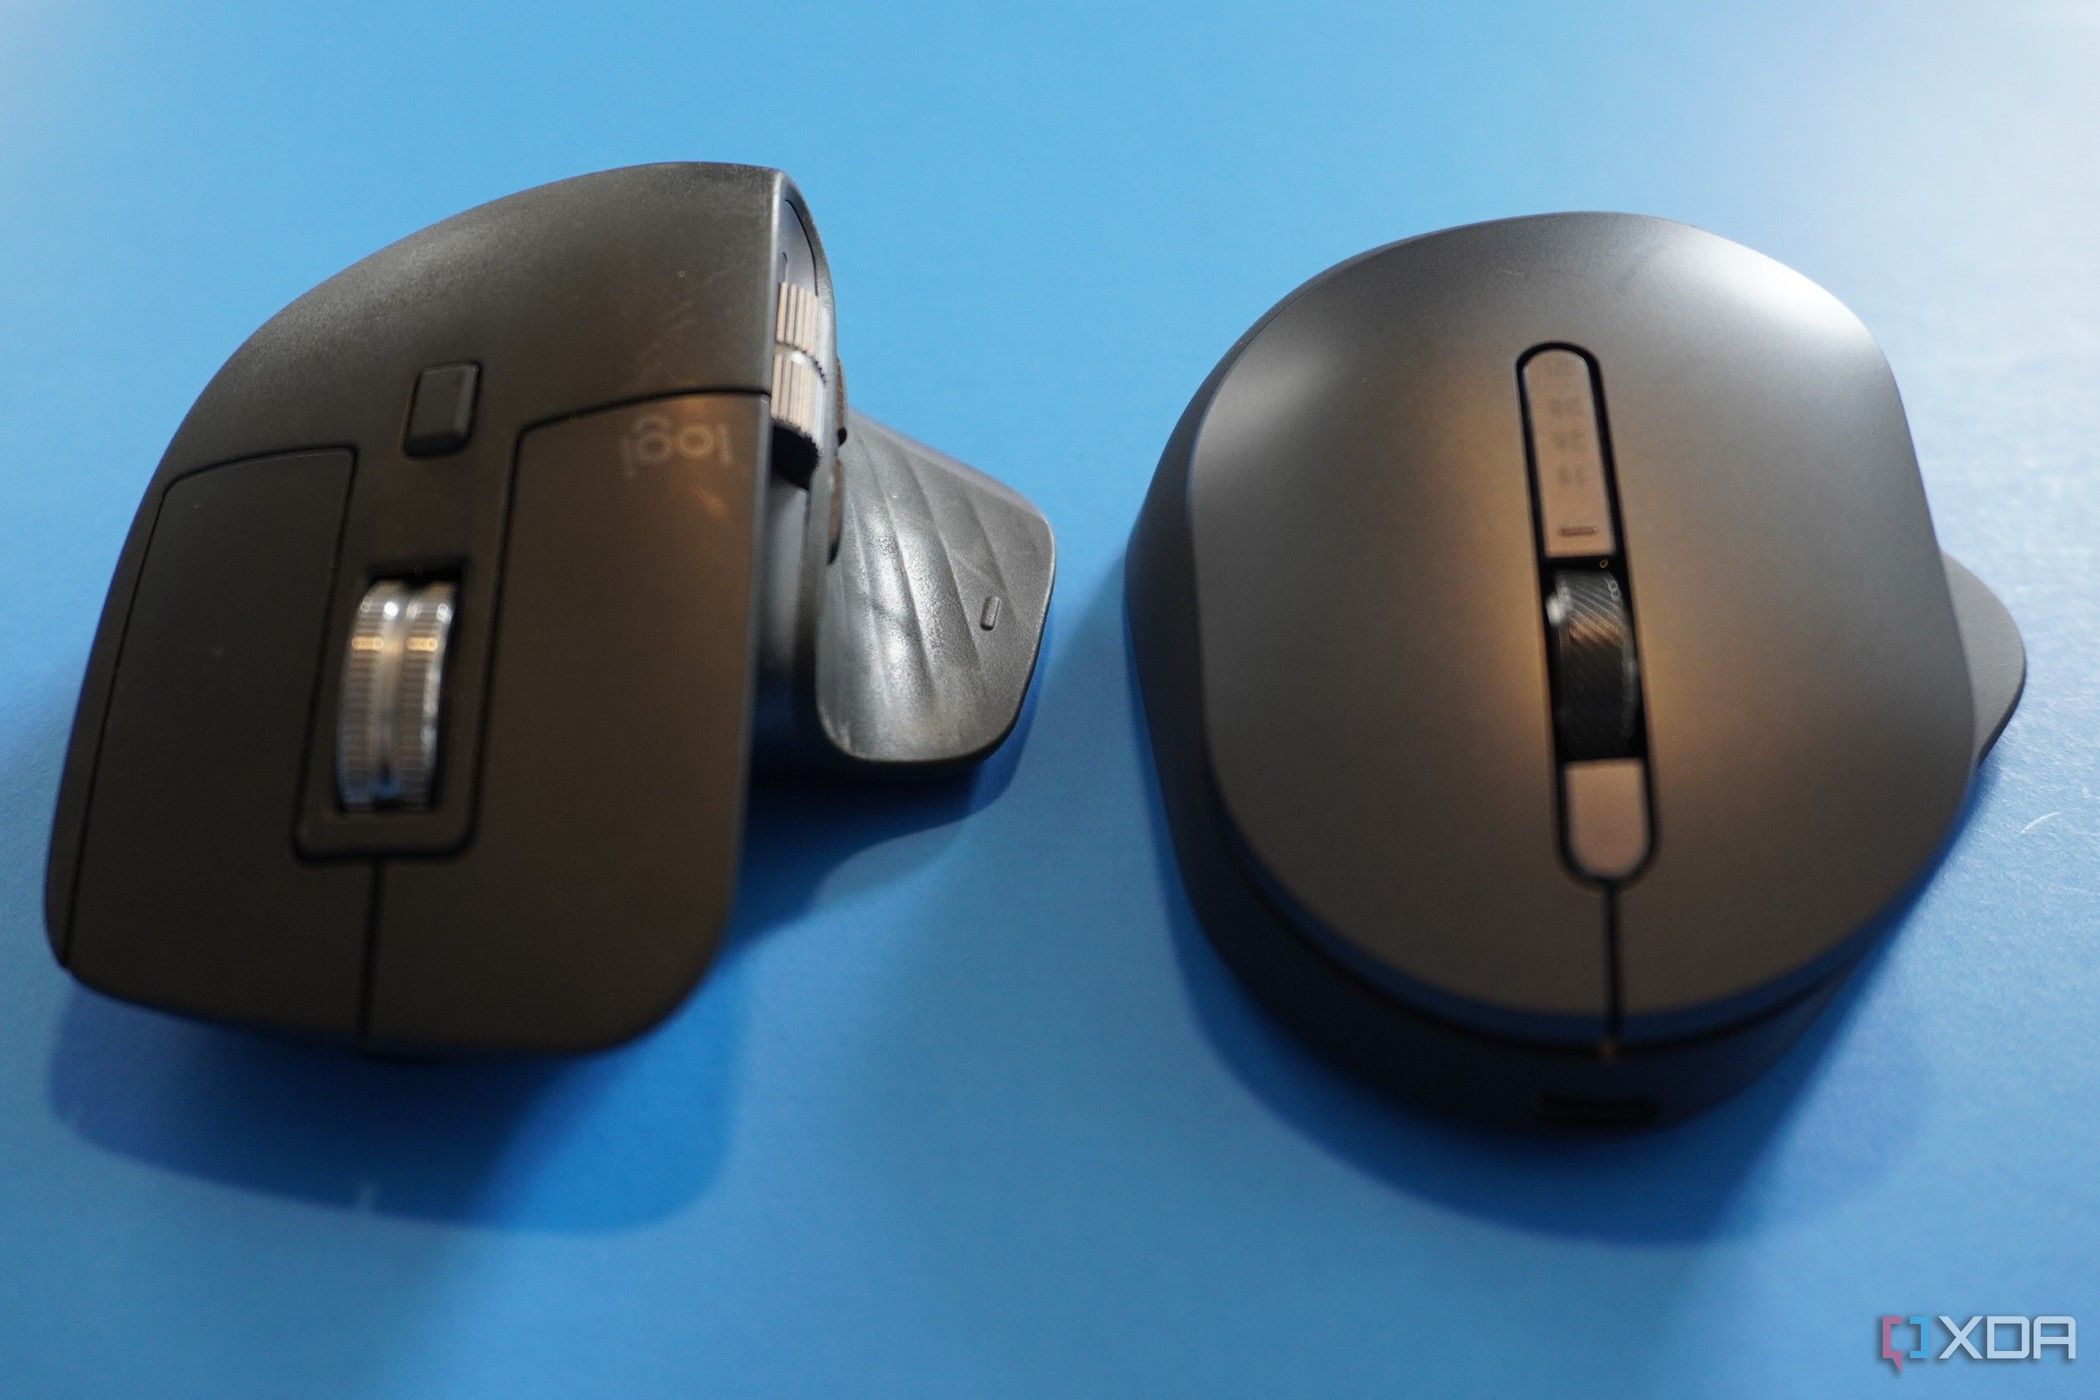 A Dell mouse with logitech mouse 